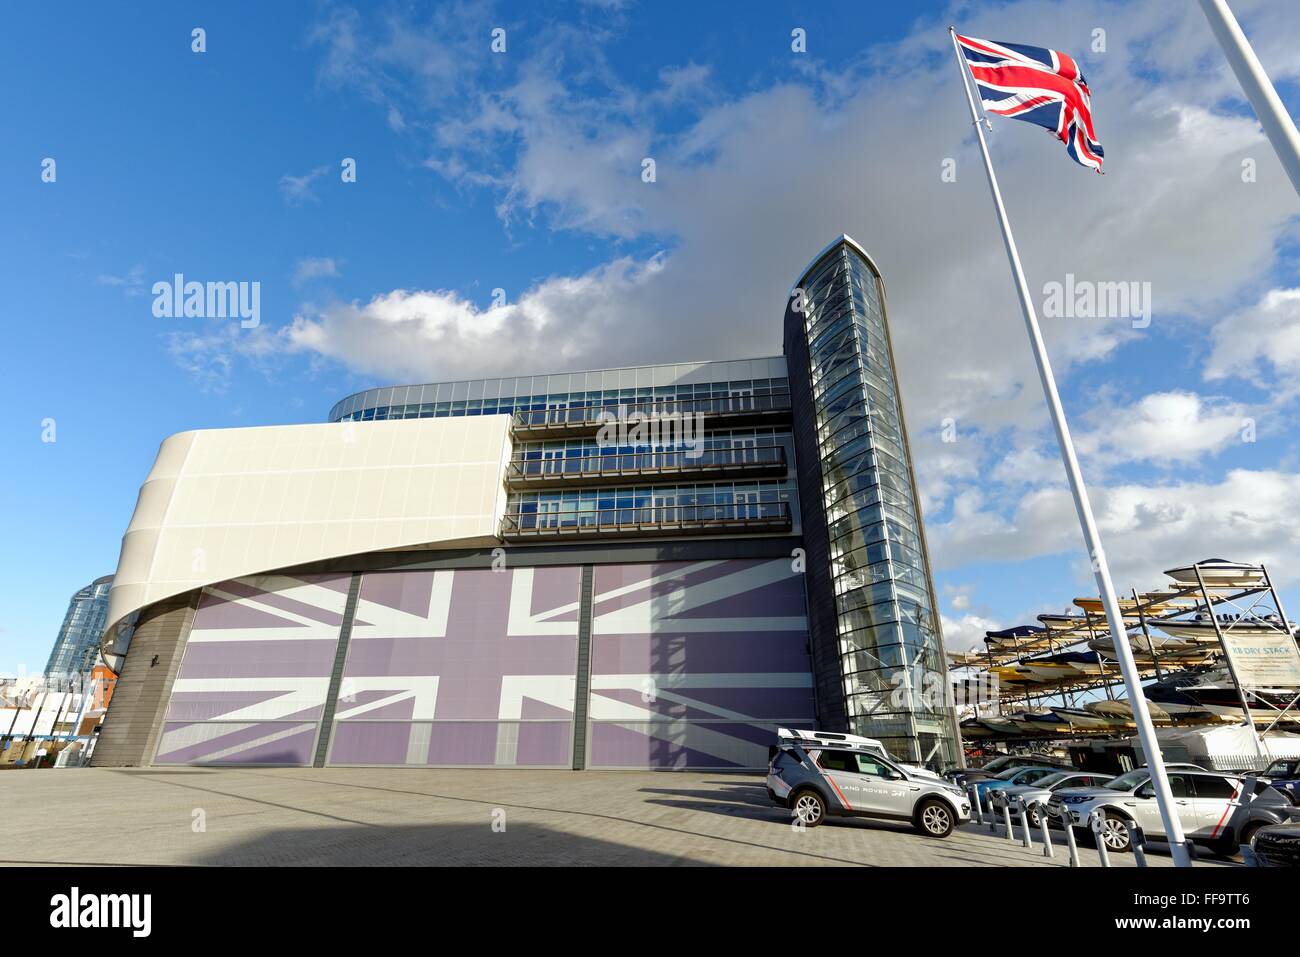 Exterior of the Ben Ainslie racing centre Old Portsmouth UK Stock Photo